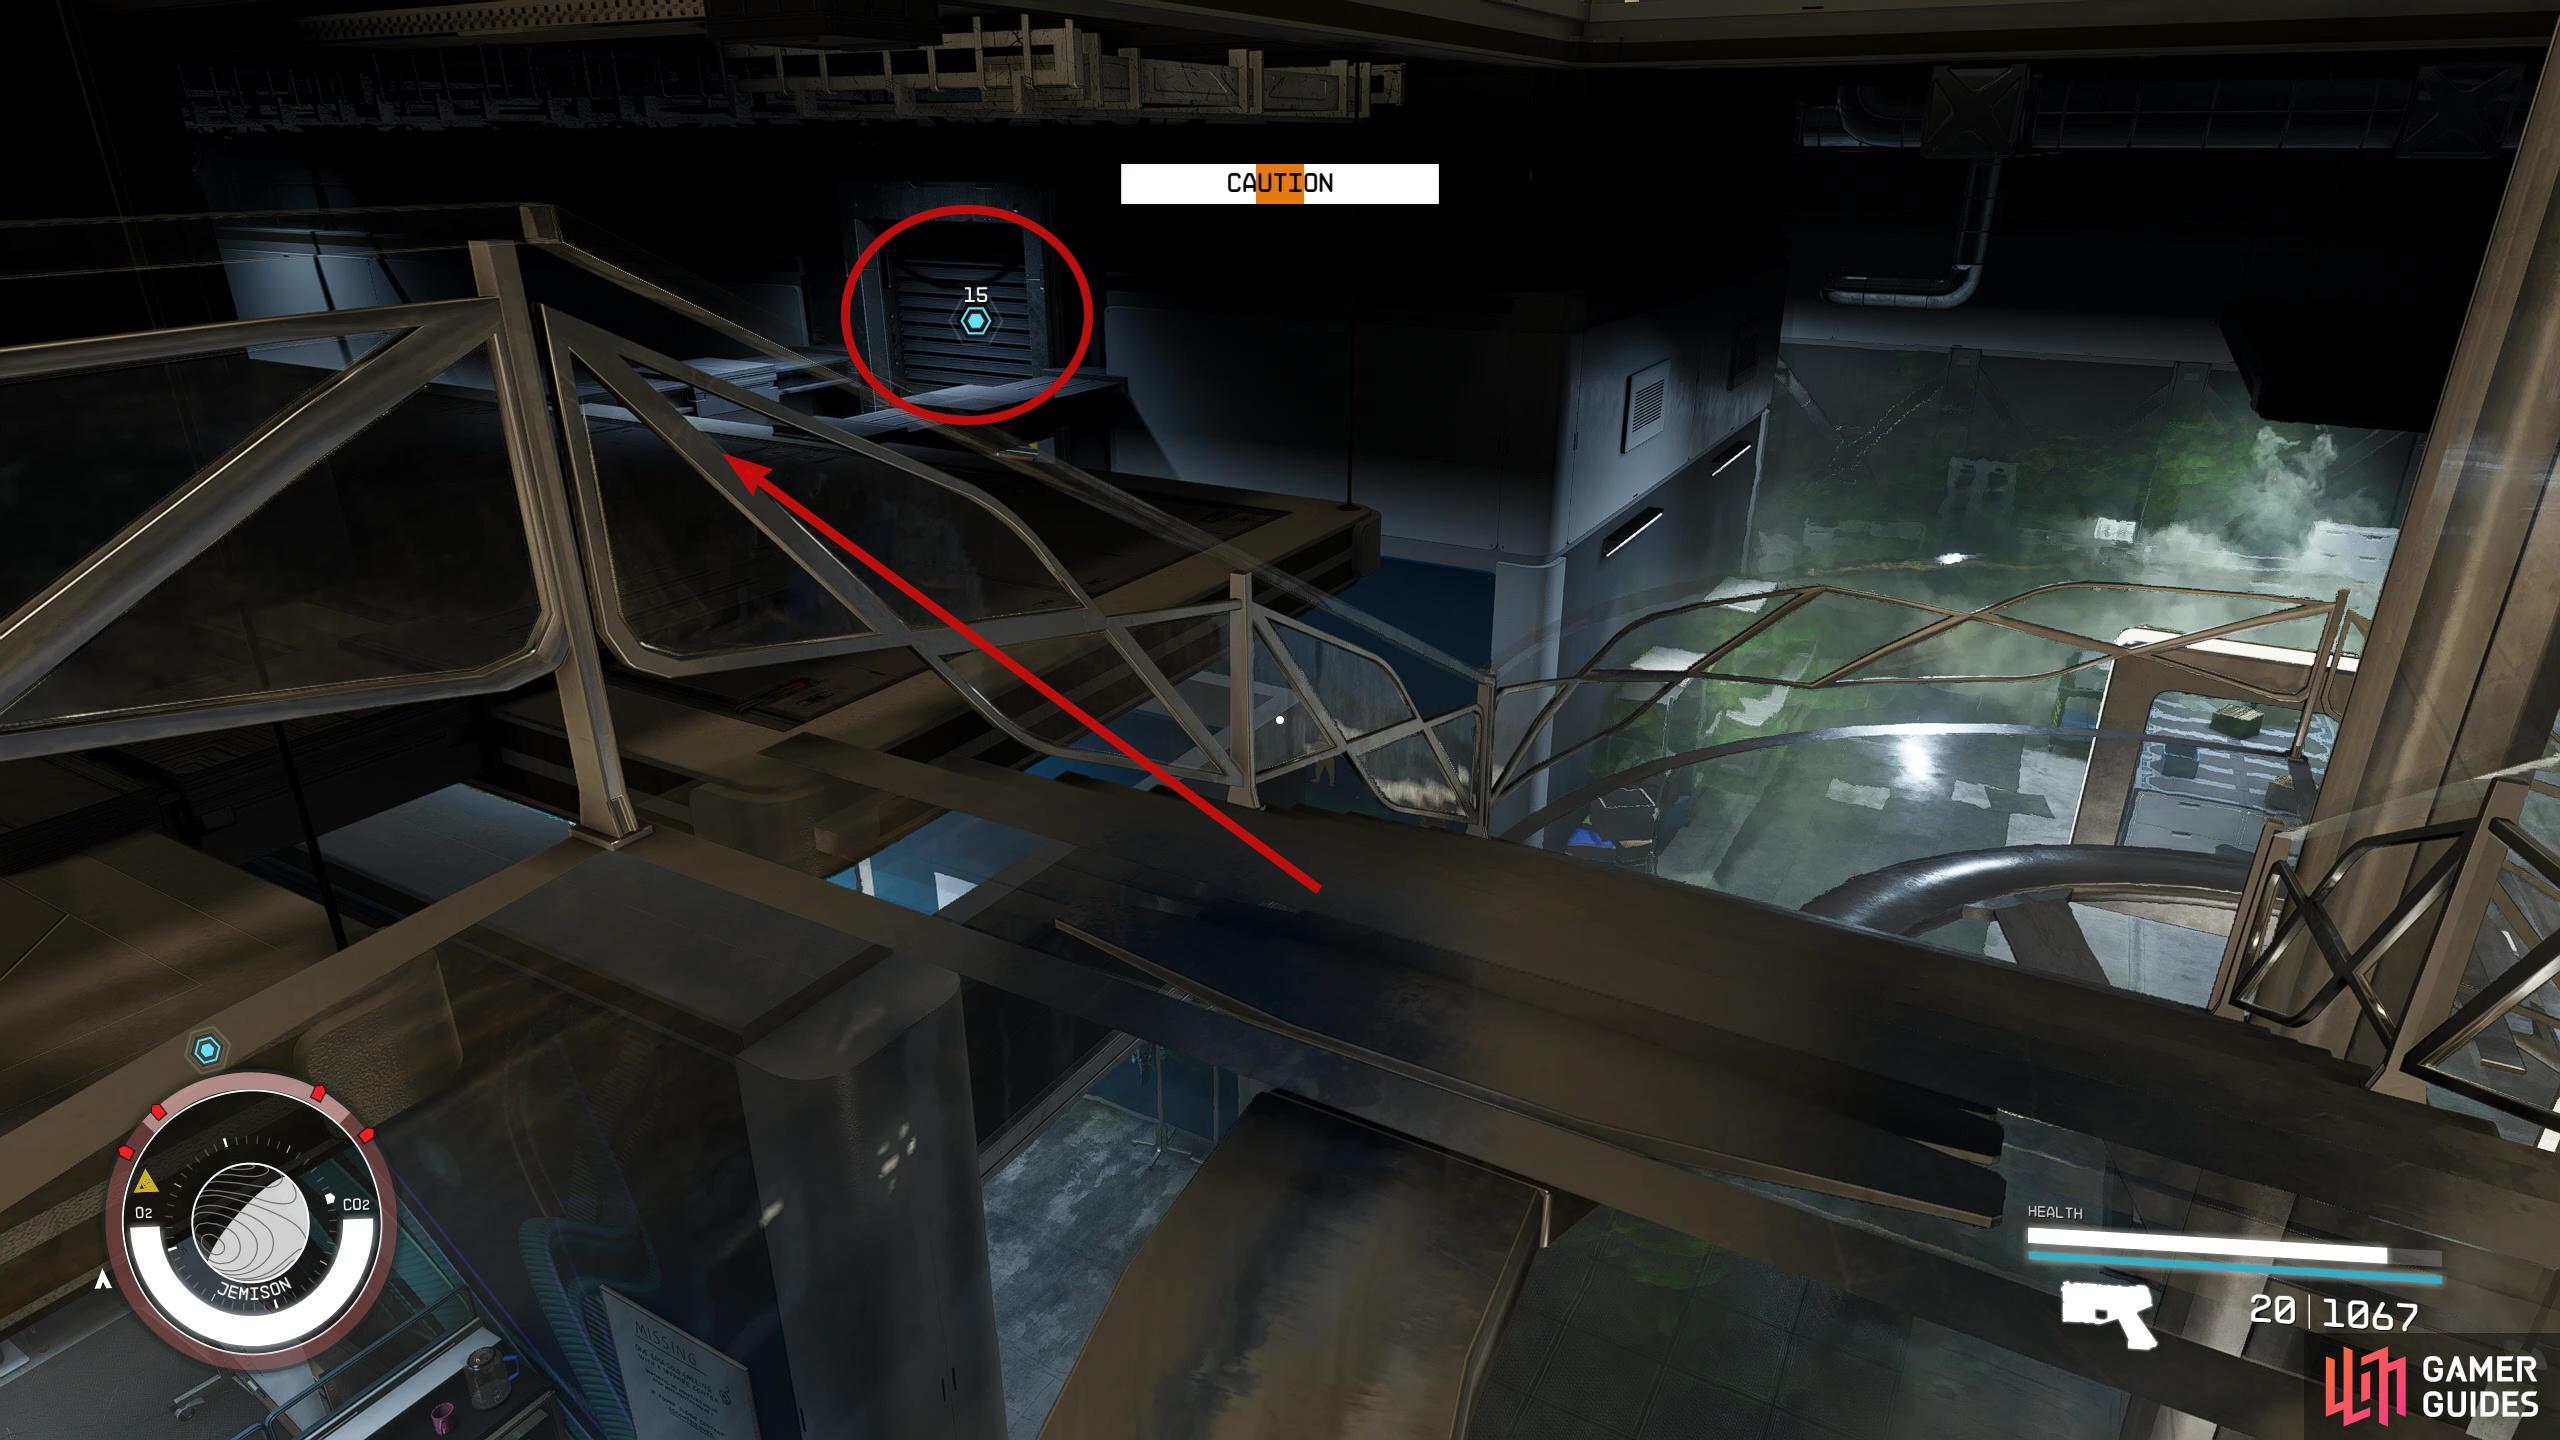 With the manipulated guard following you, jump over the railing onto the platform and go through the vent.